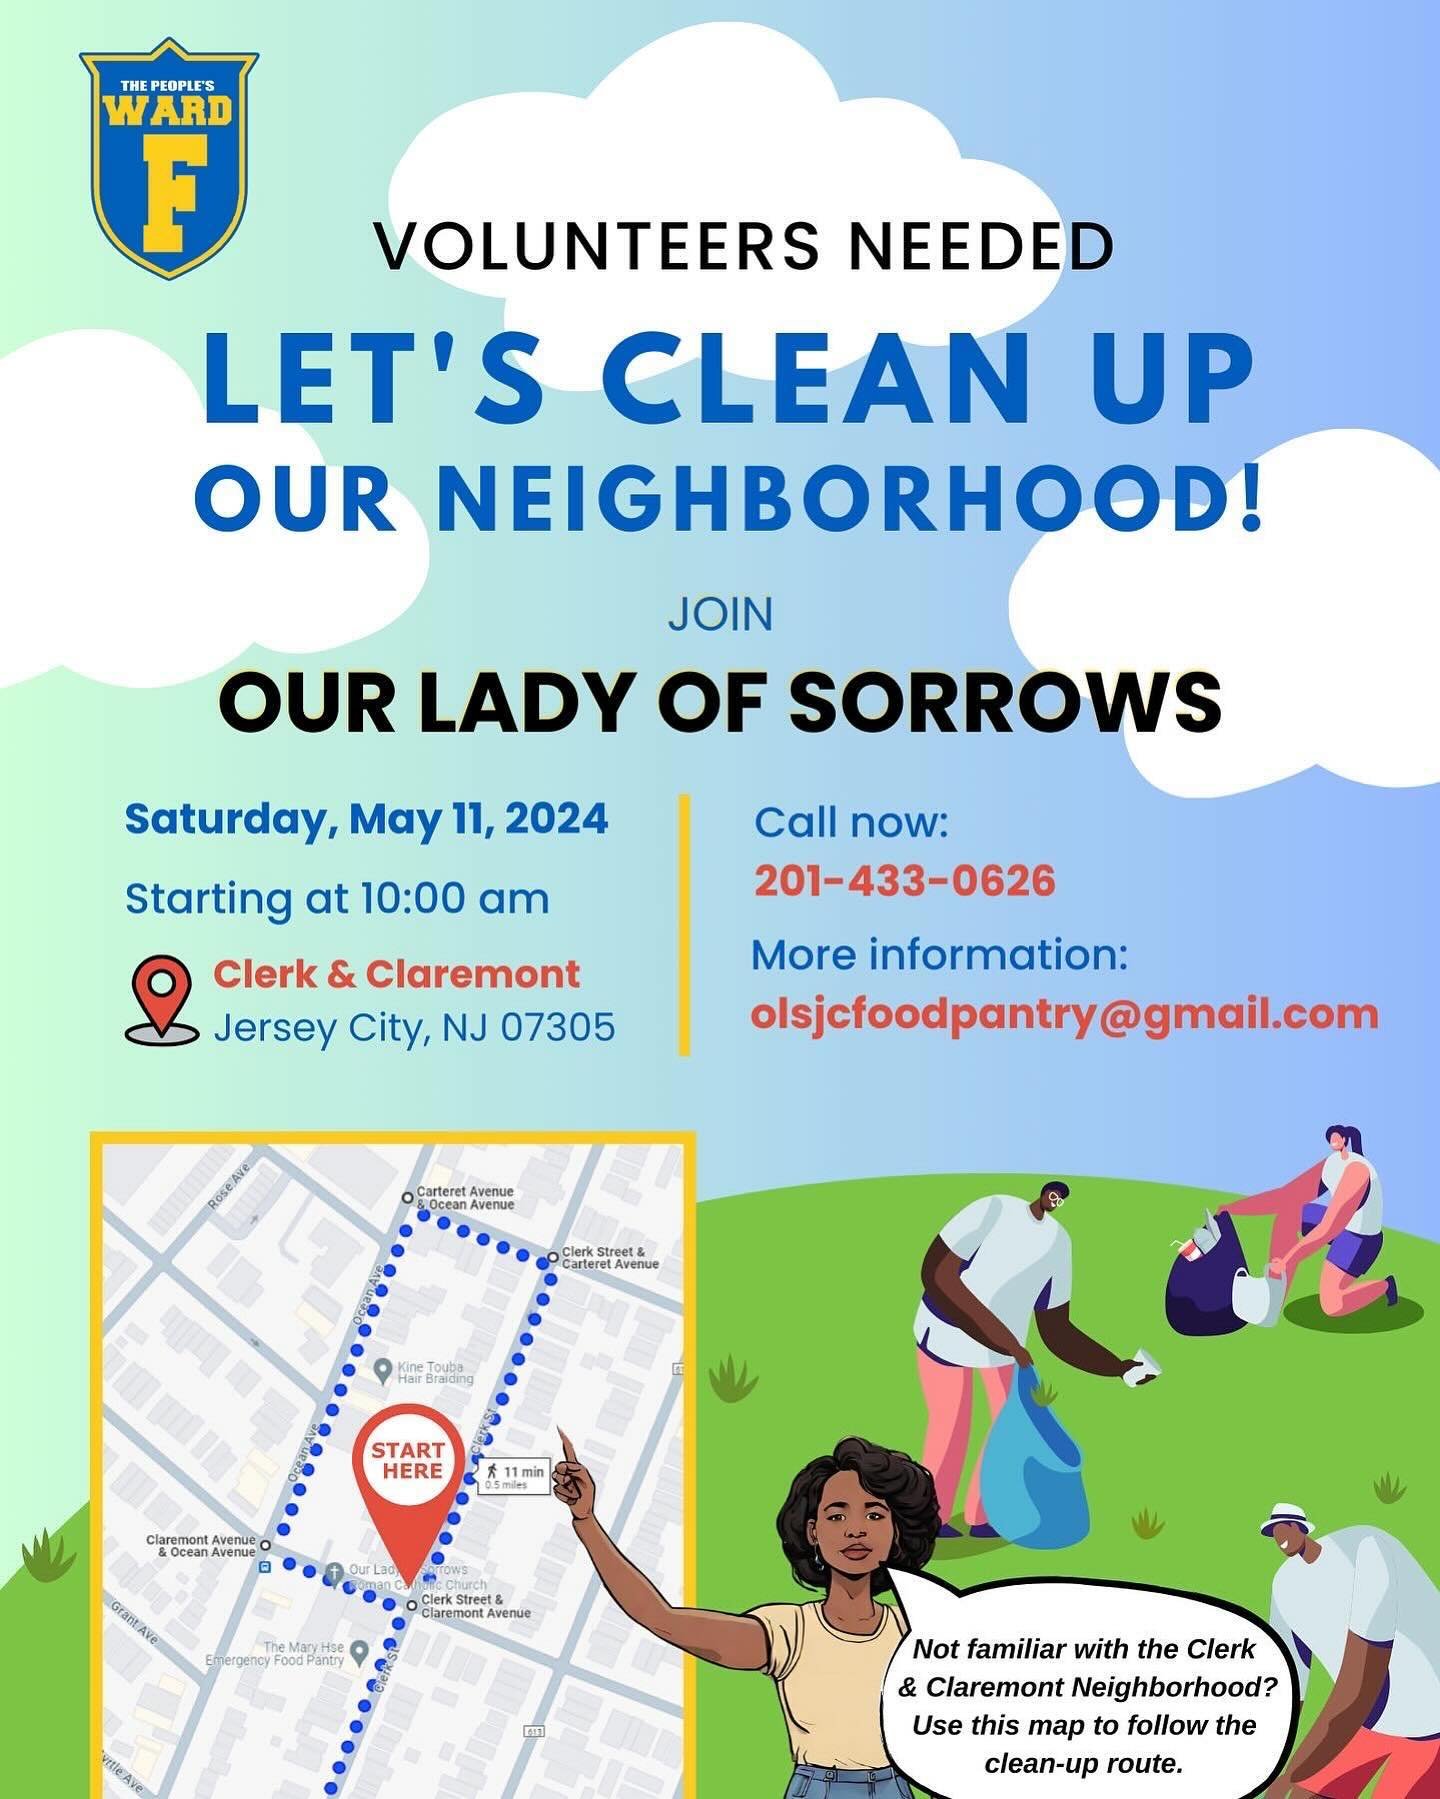 Community Cleanups: 
Saturday, May 11th, 10:00 AM - 2:00 PM

For More Information Contact :
Carteret/Claremont/Myrtle (Ocean to Clerk) EMAIL OLS:  olsjcfoodpantry@gmail.com

Volunteers will receive materials (bags and gloves) on the day of the clean-